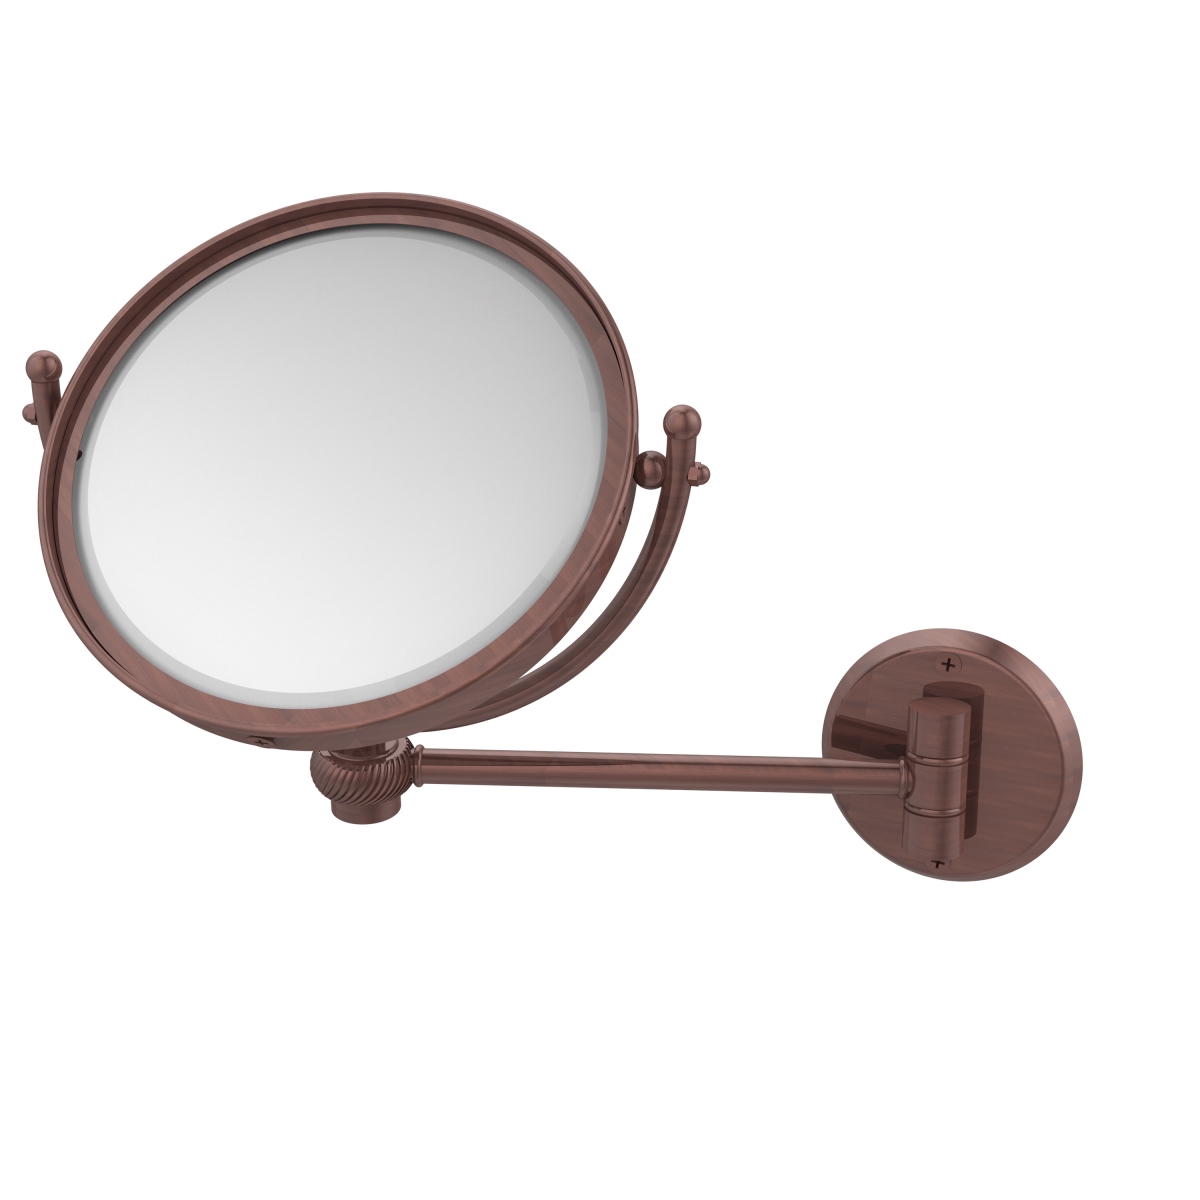 WM-5T-4X-CA 8 in. Wall Mounted Make-Up Mirror 4X Magnification, Antique Copper - 10 x 8 x 11 in -  Allied Brass, WM-5T/4X-CA